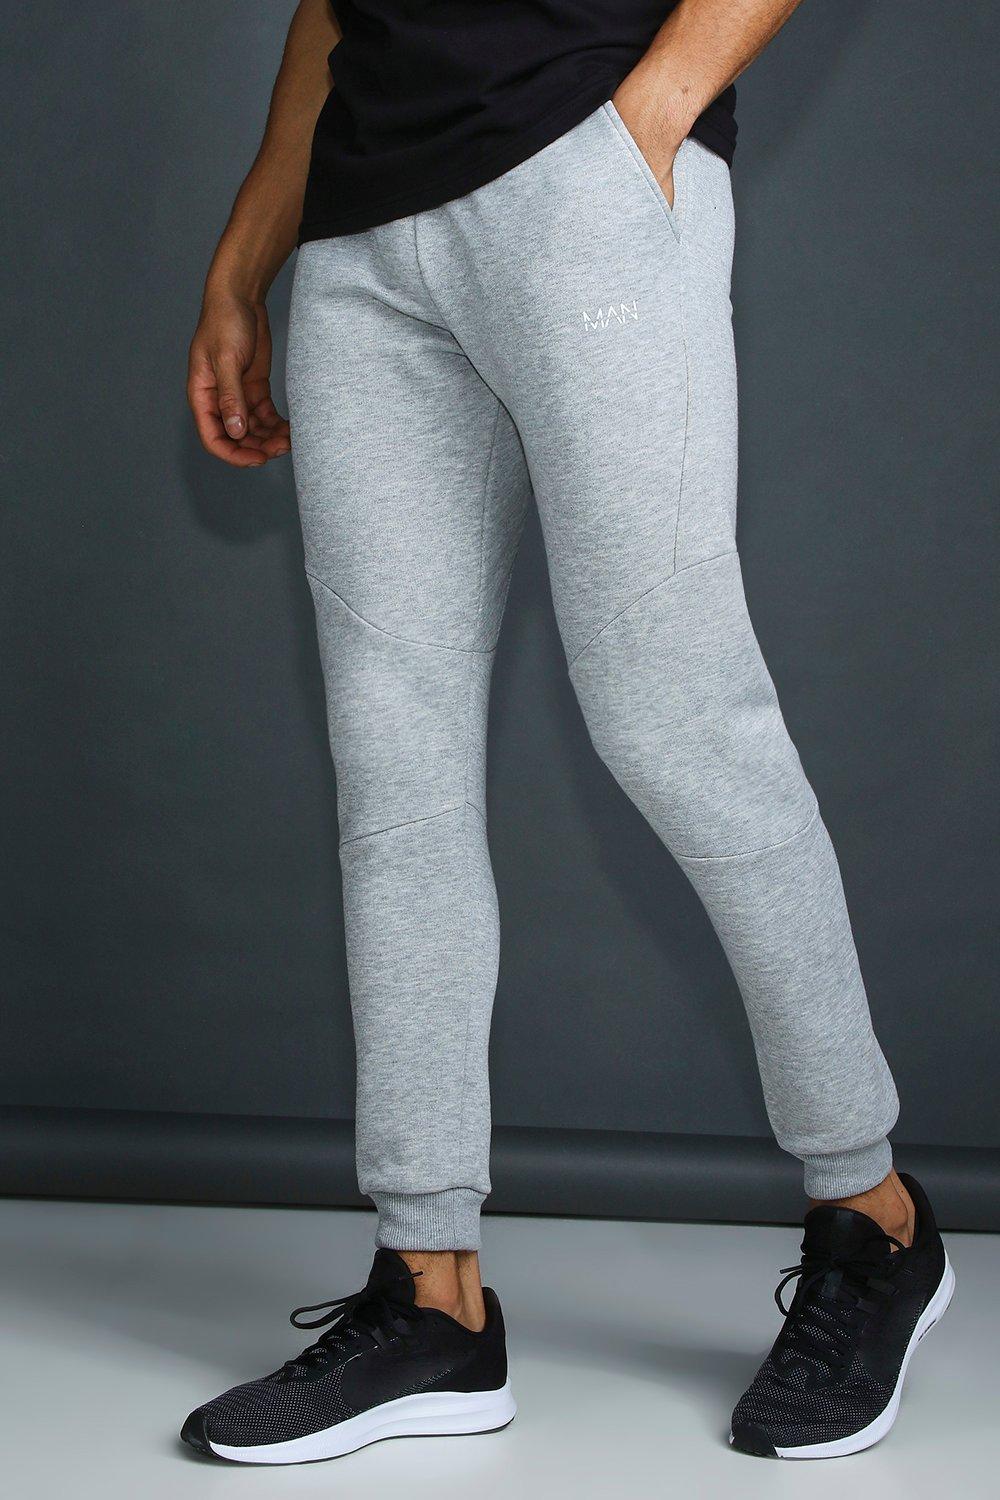 boohooMAN Active Tapered Fit Jogger sweatpants for men